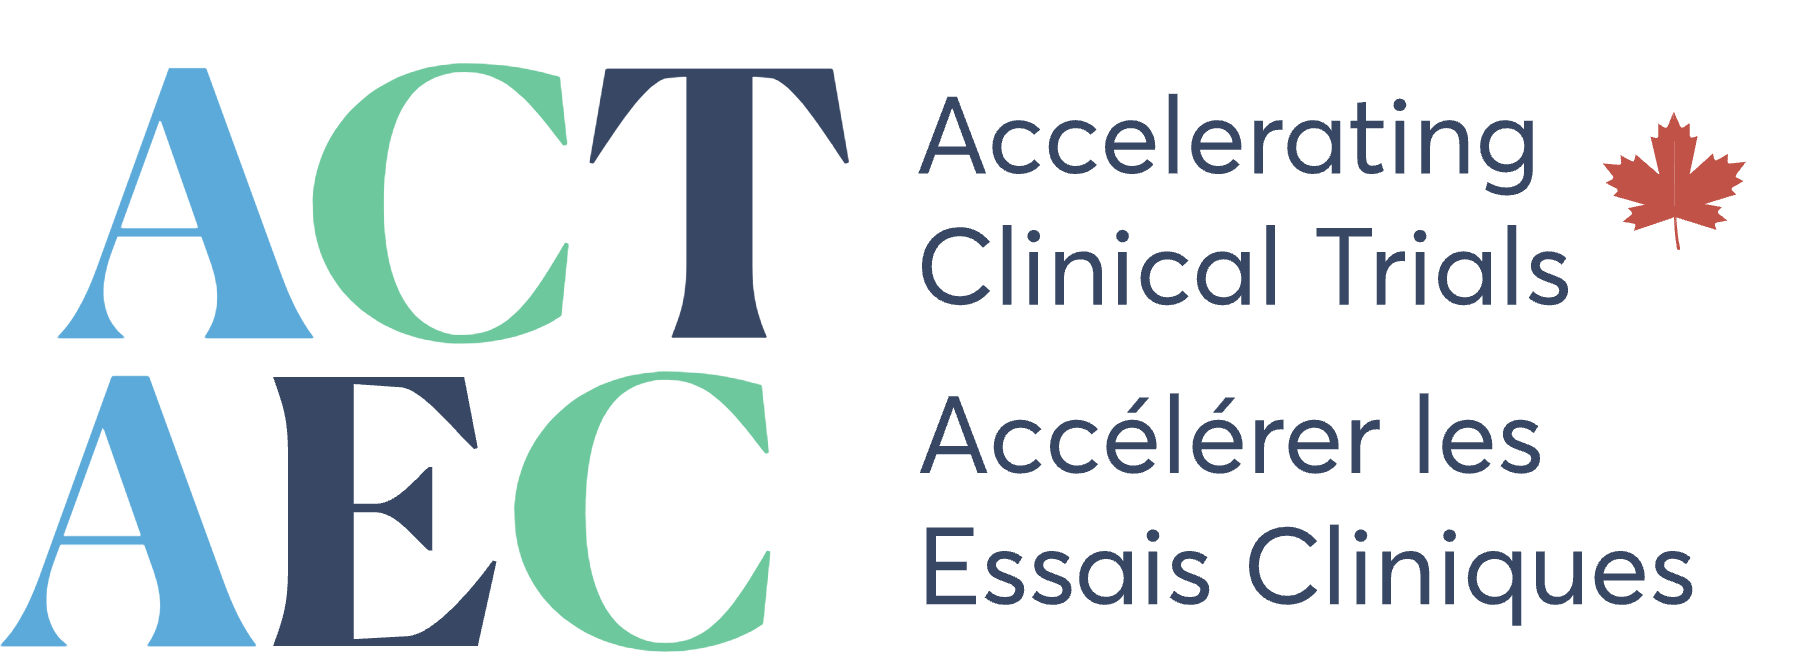 Accelerating Clinical Trials